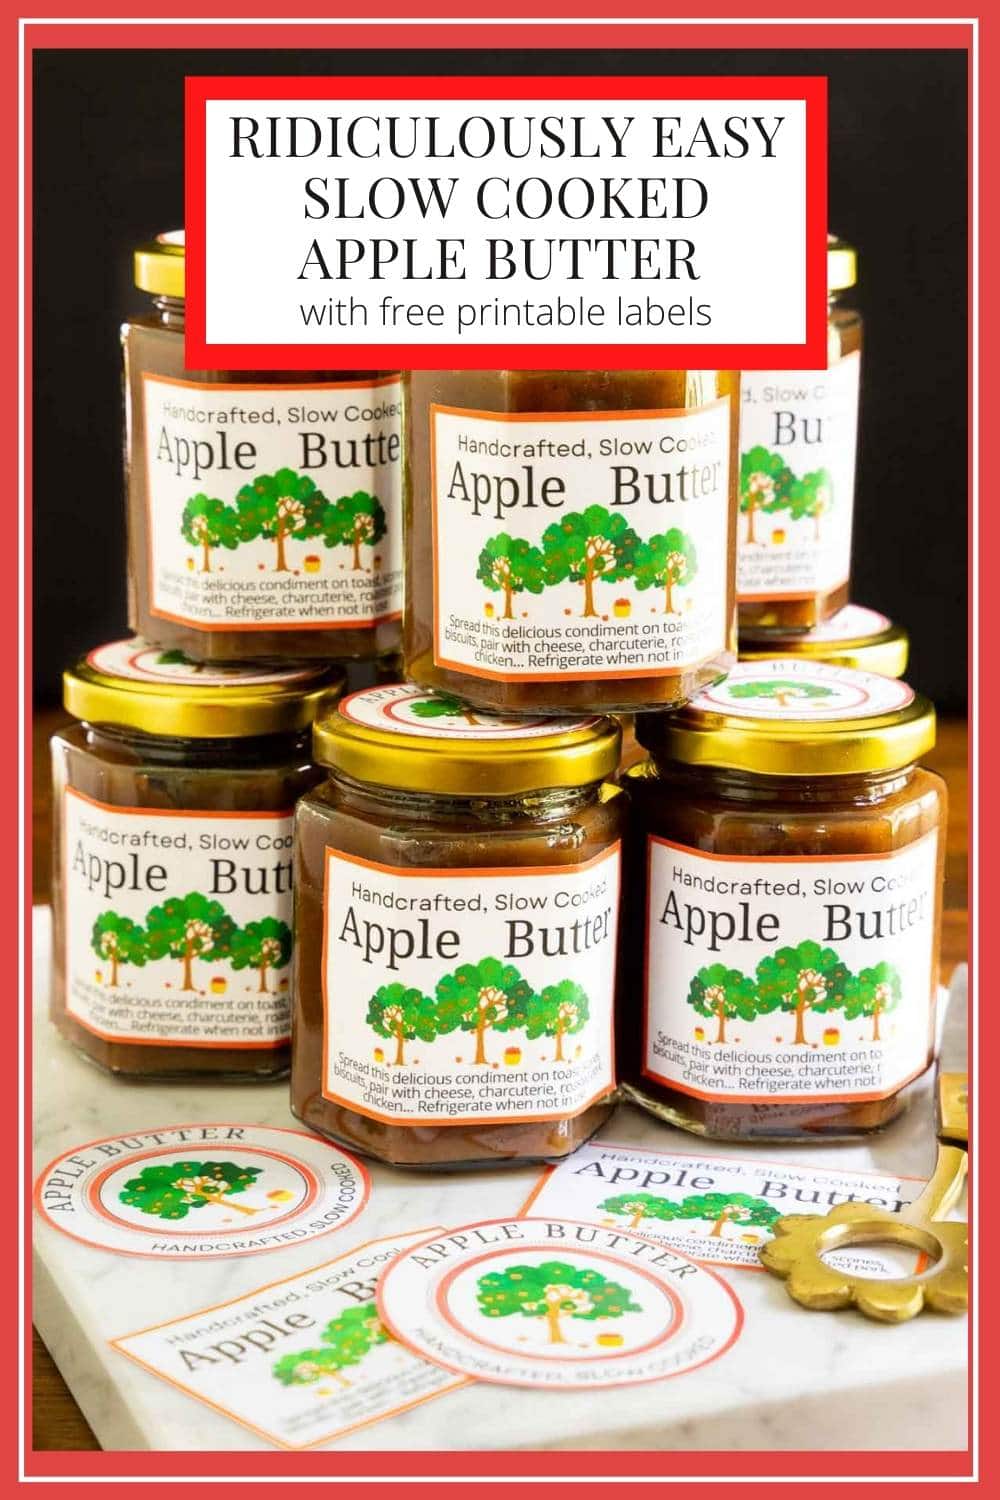 Ridiculously Easy Slow Cooked Apple Butter (with free printable gift labels)